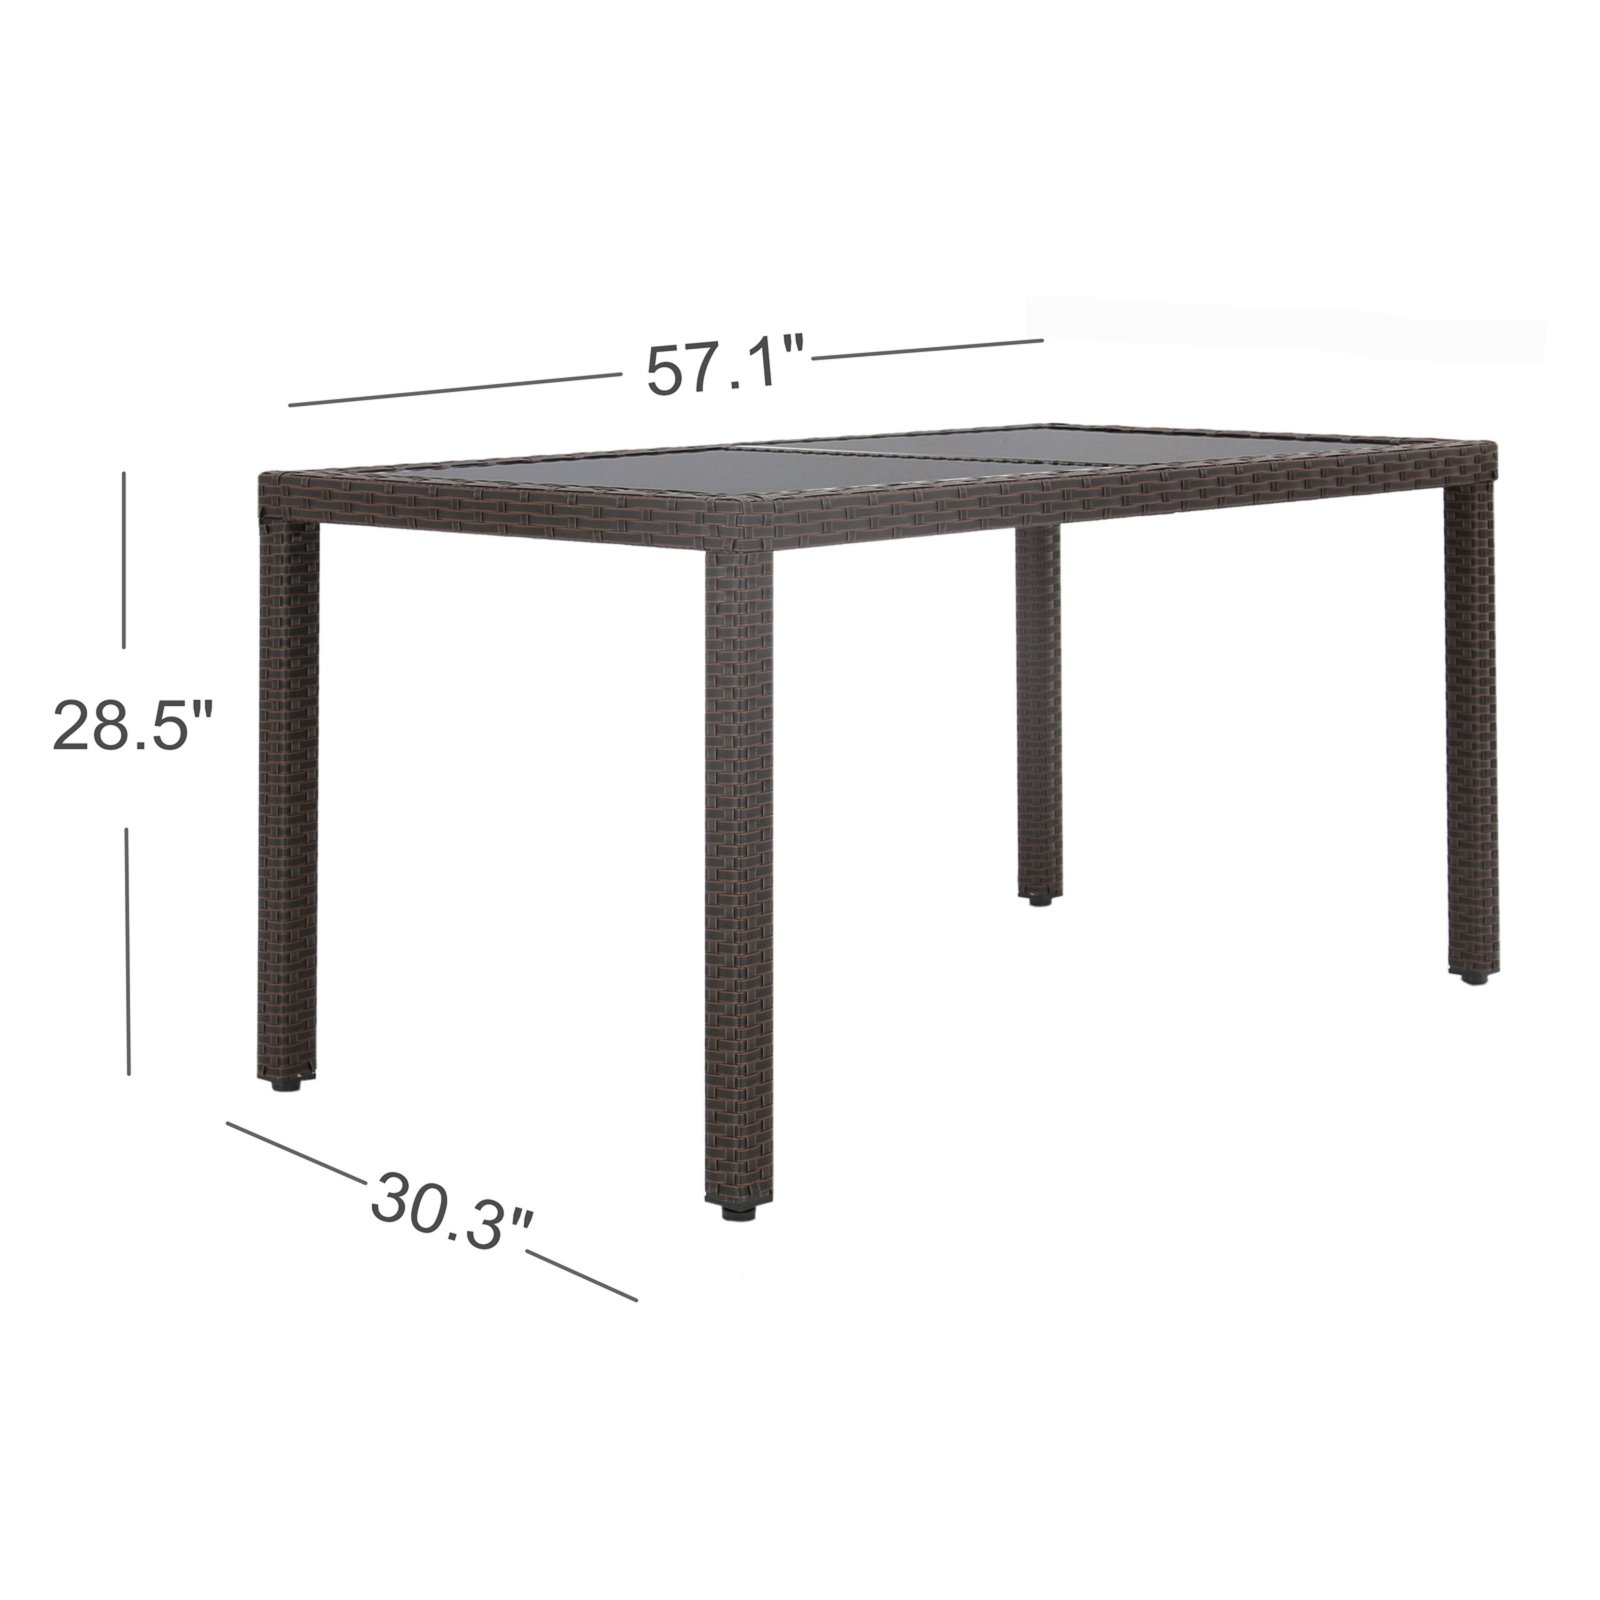 Baner Garden  Outdoor Patio Resin Wicker Steel Rectangle Dining Table Furniture, Chocolate - 57.1 x 30.3 x 28.5 in. - image 4 of 5